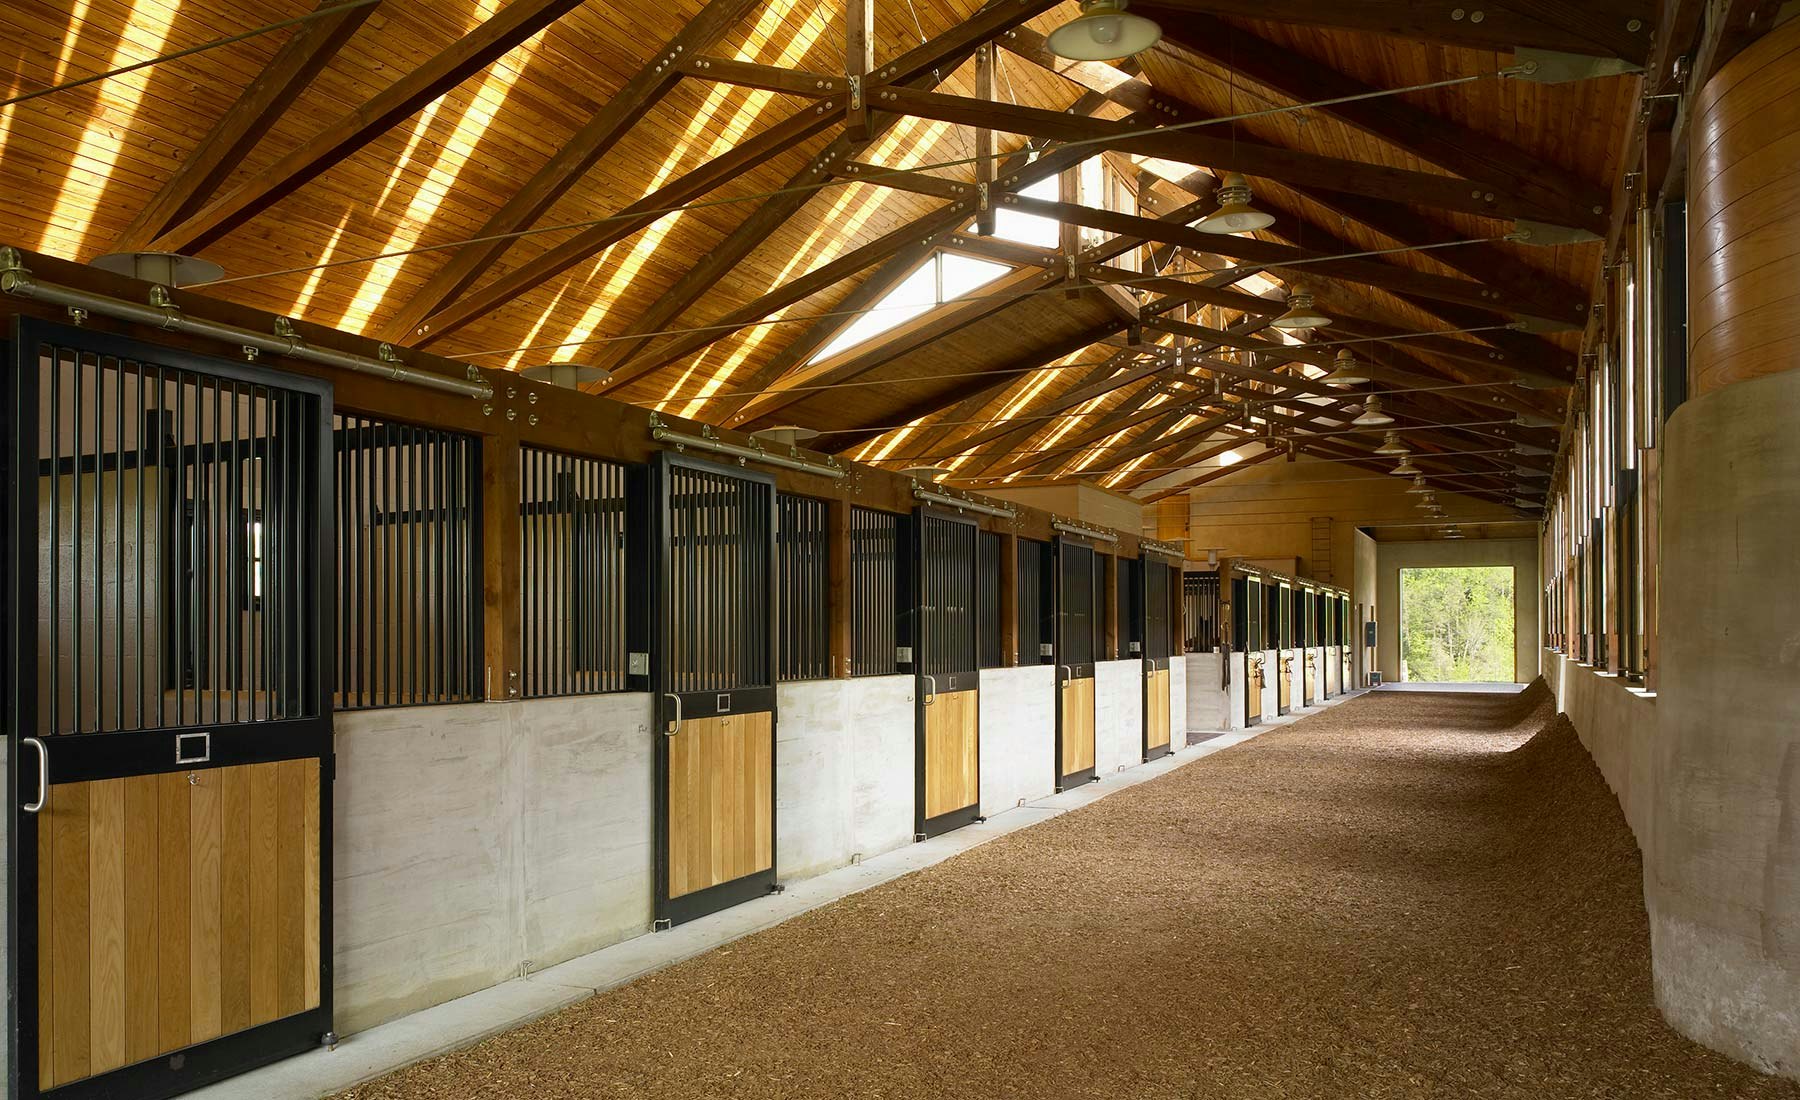 Burning Daylight Stables Architecture and Design